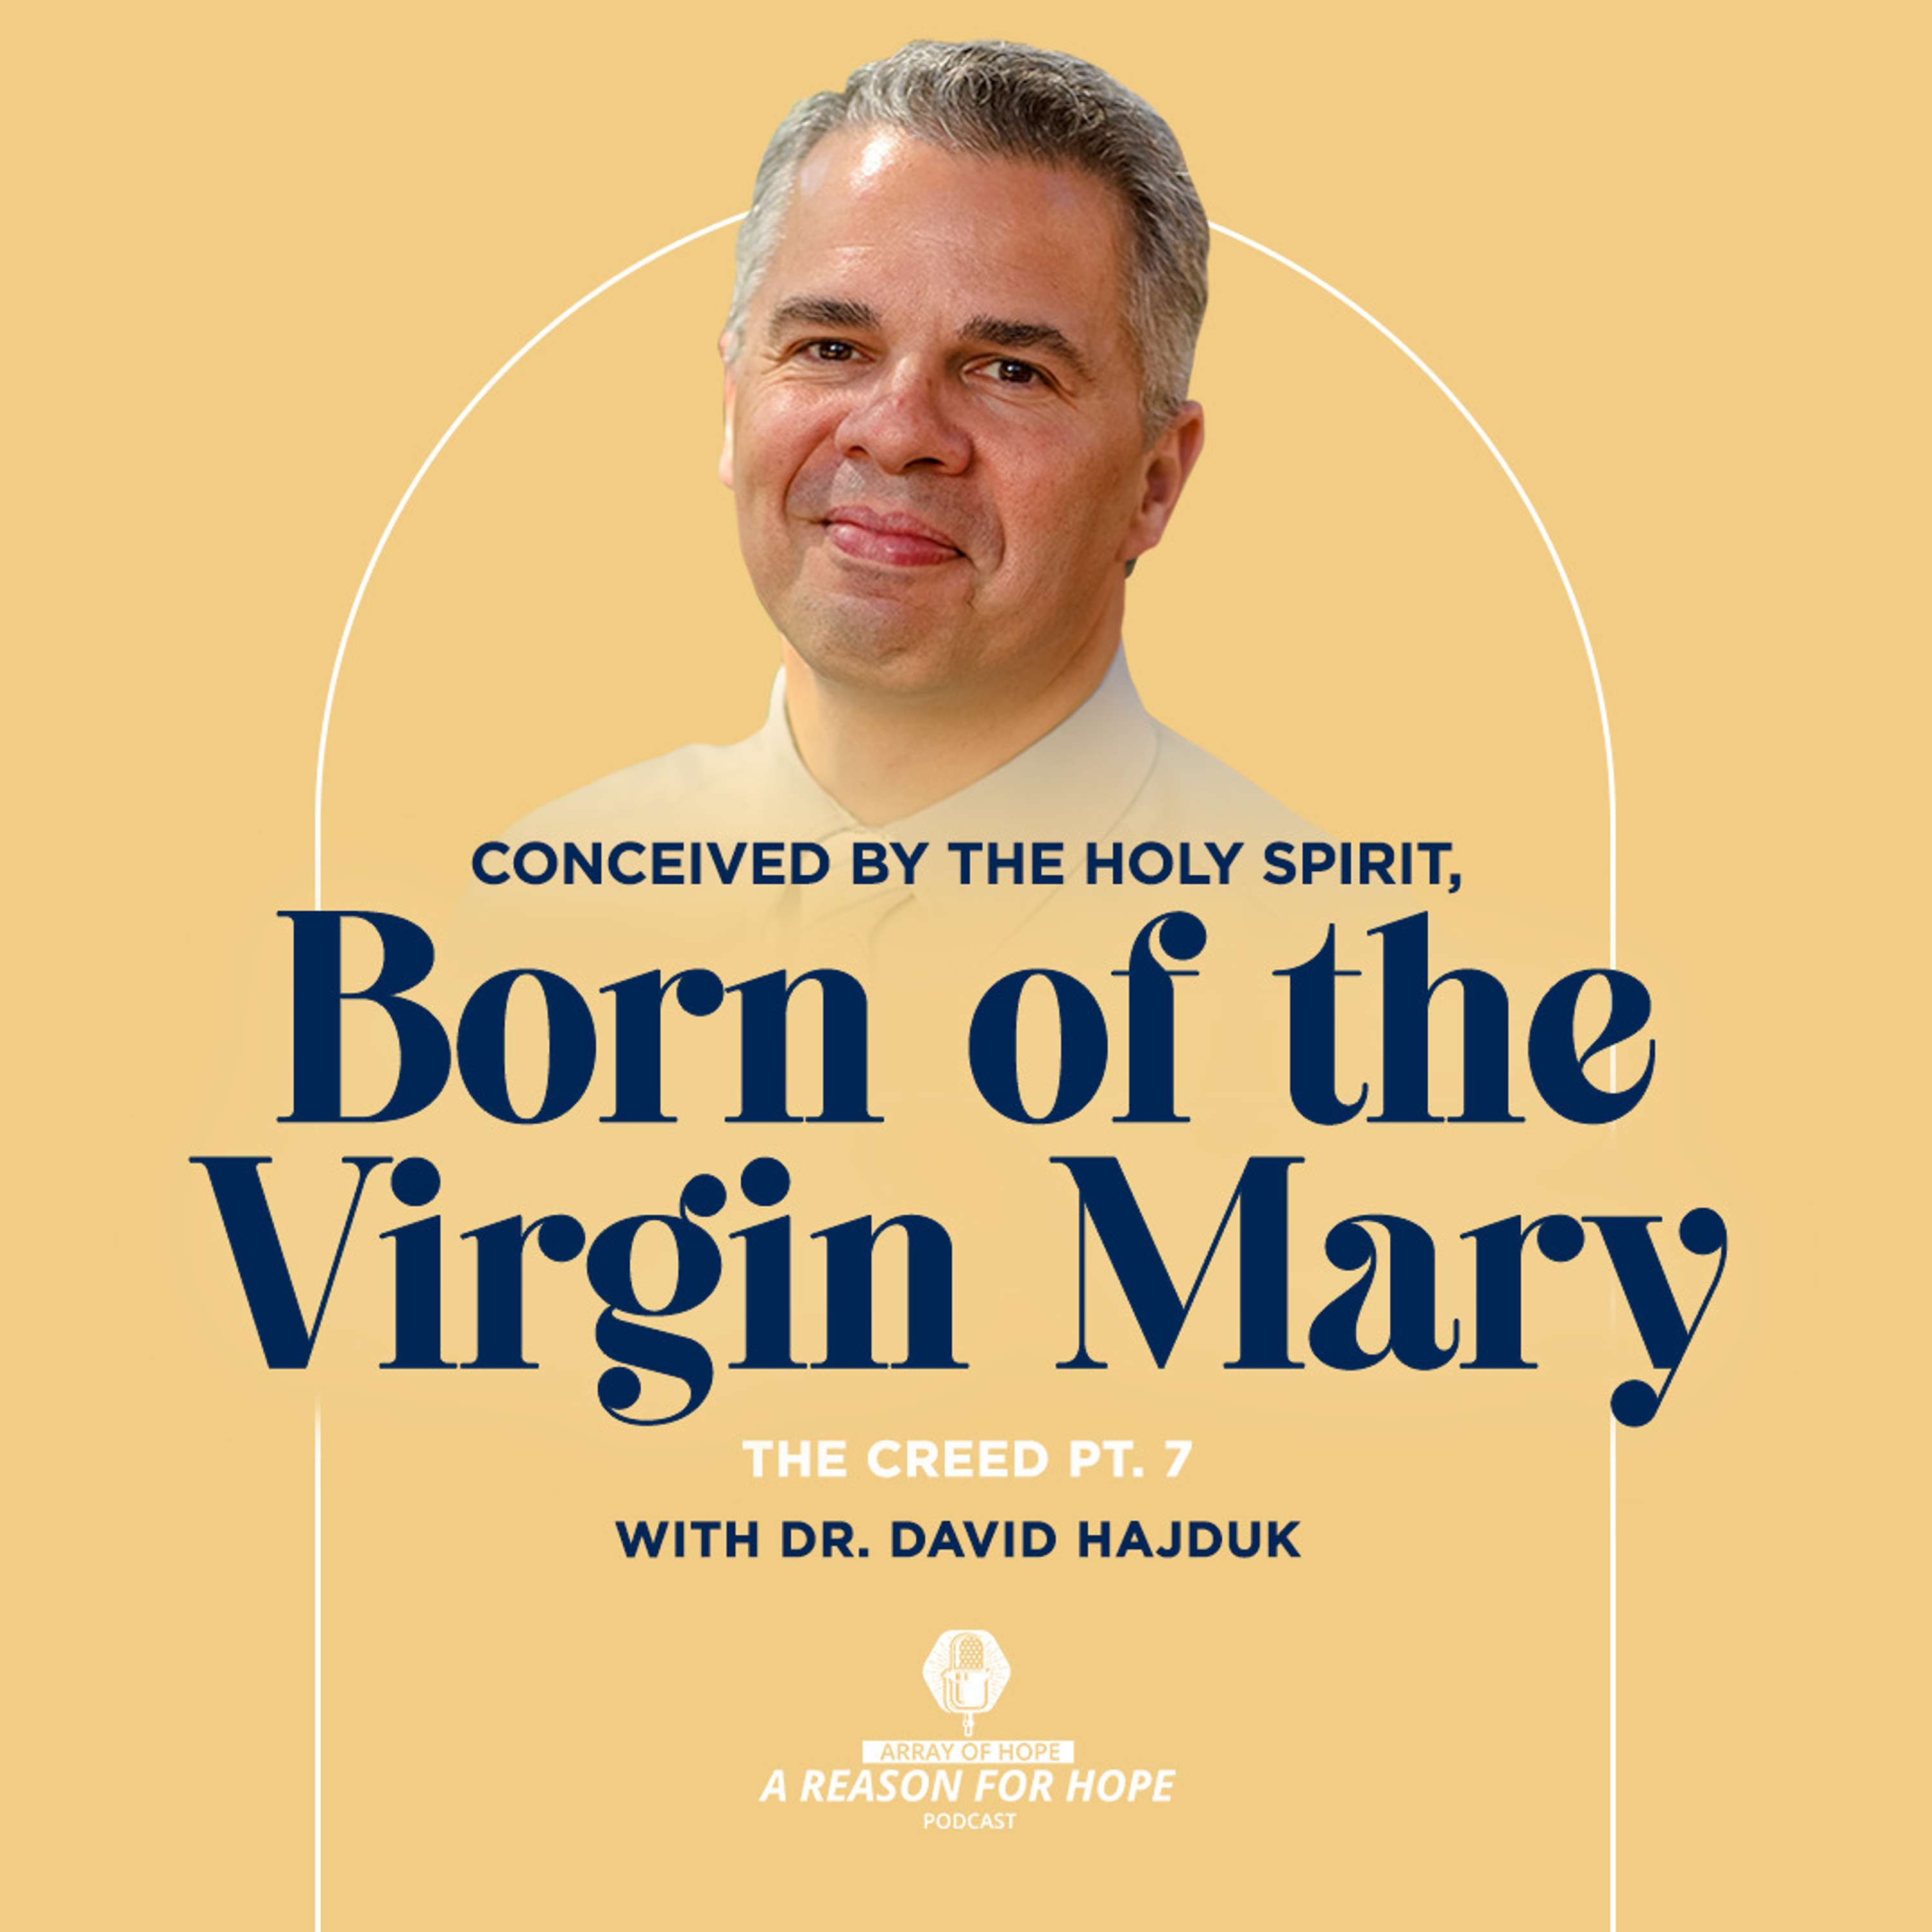 Conceived by the Holy Spirit, Born of the Virgin Mary | The Creed (Pt. 7) | DM